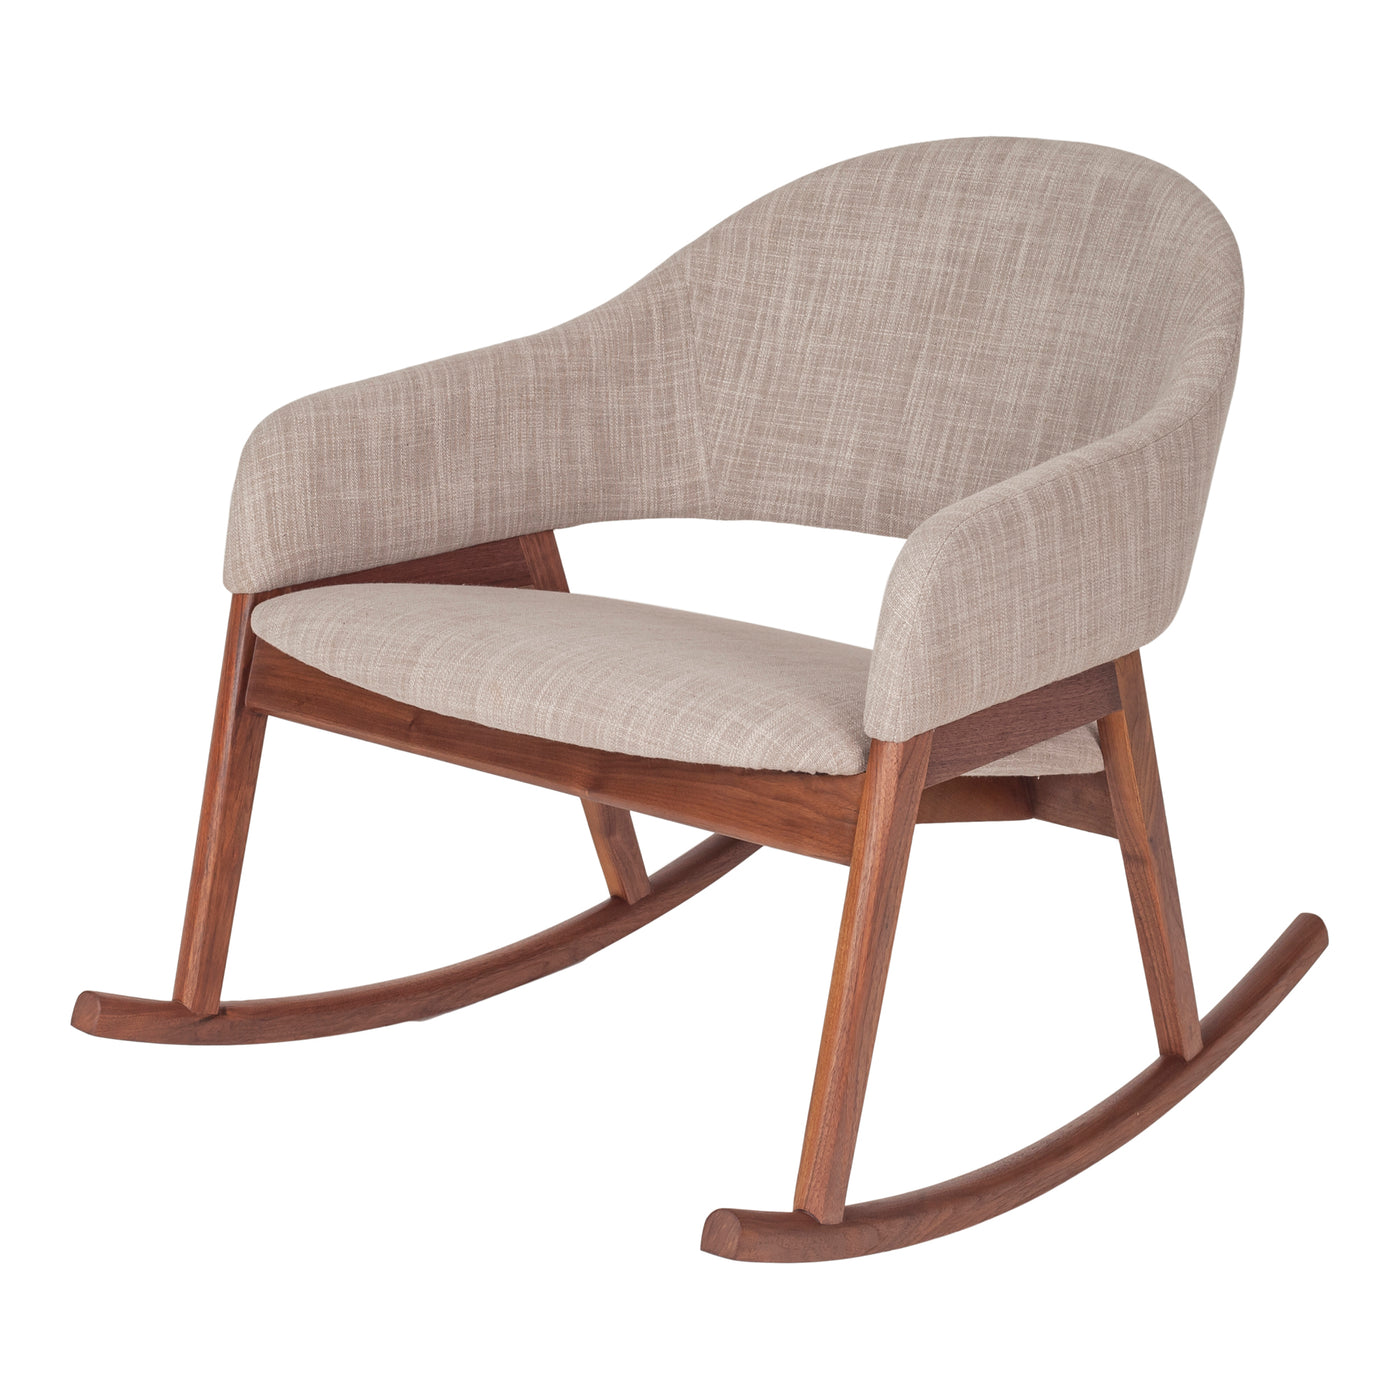 Scandi-style that you can sway with, brighten up a corner in your home with this solid walnut rocking chair. In light wove...